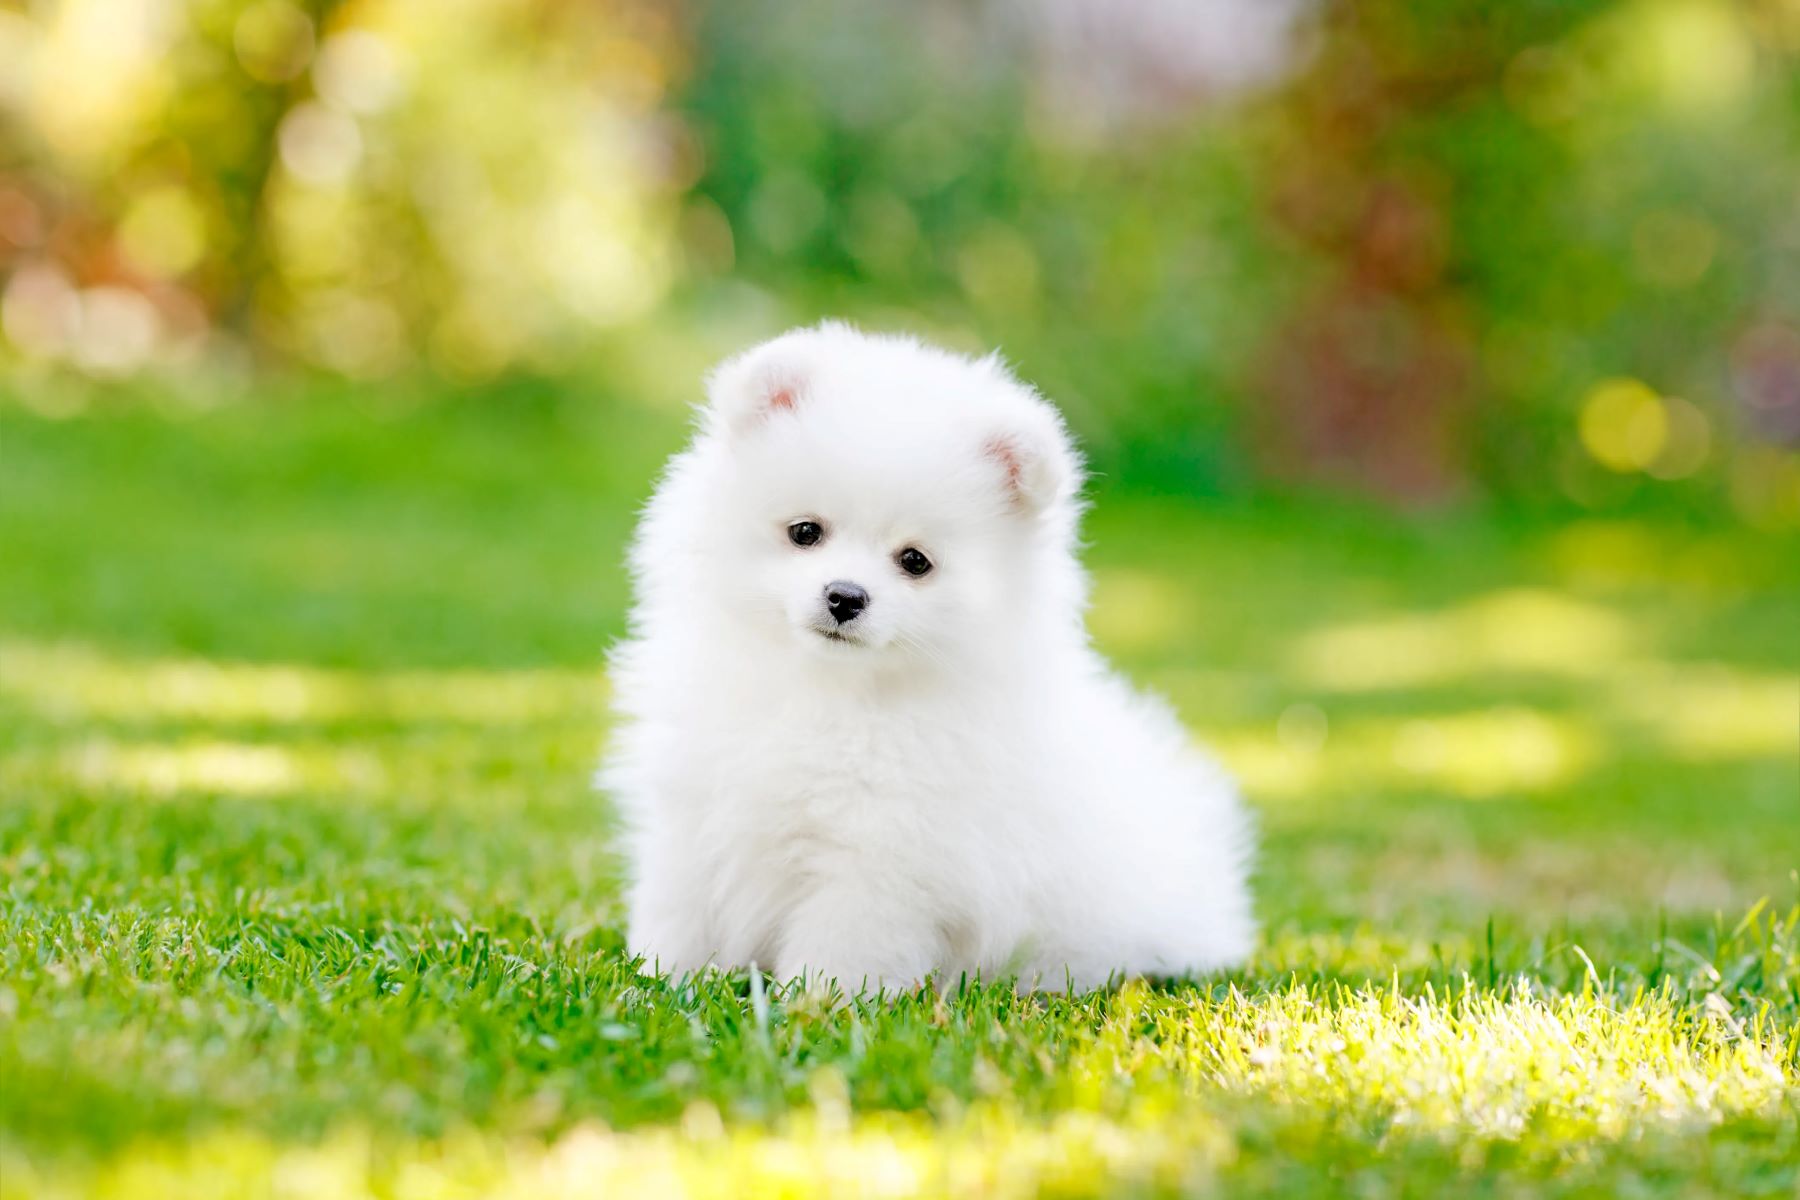 The Astonishing Price Of A White Teacup Pomeranian Revealed!